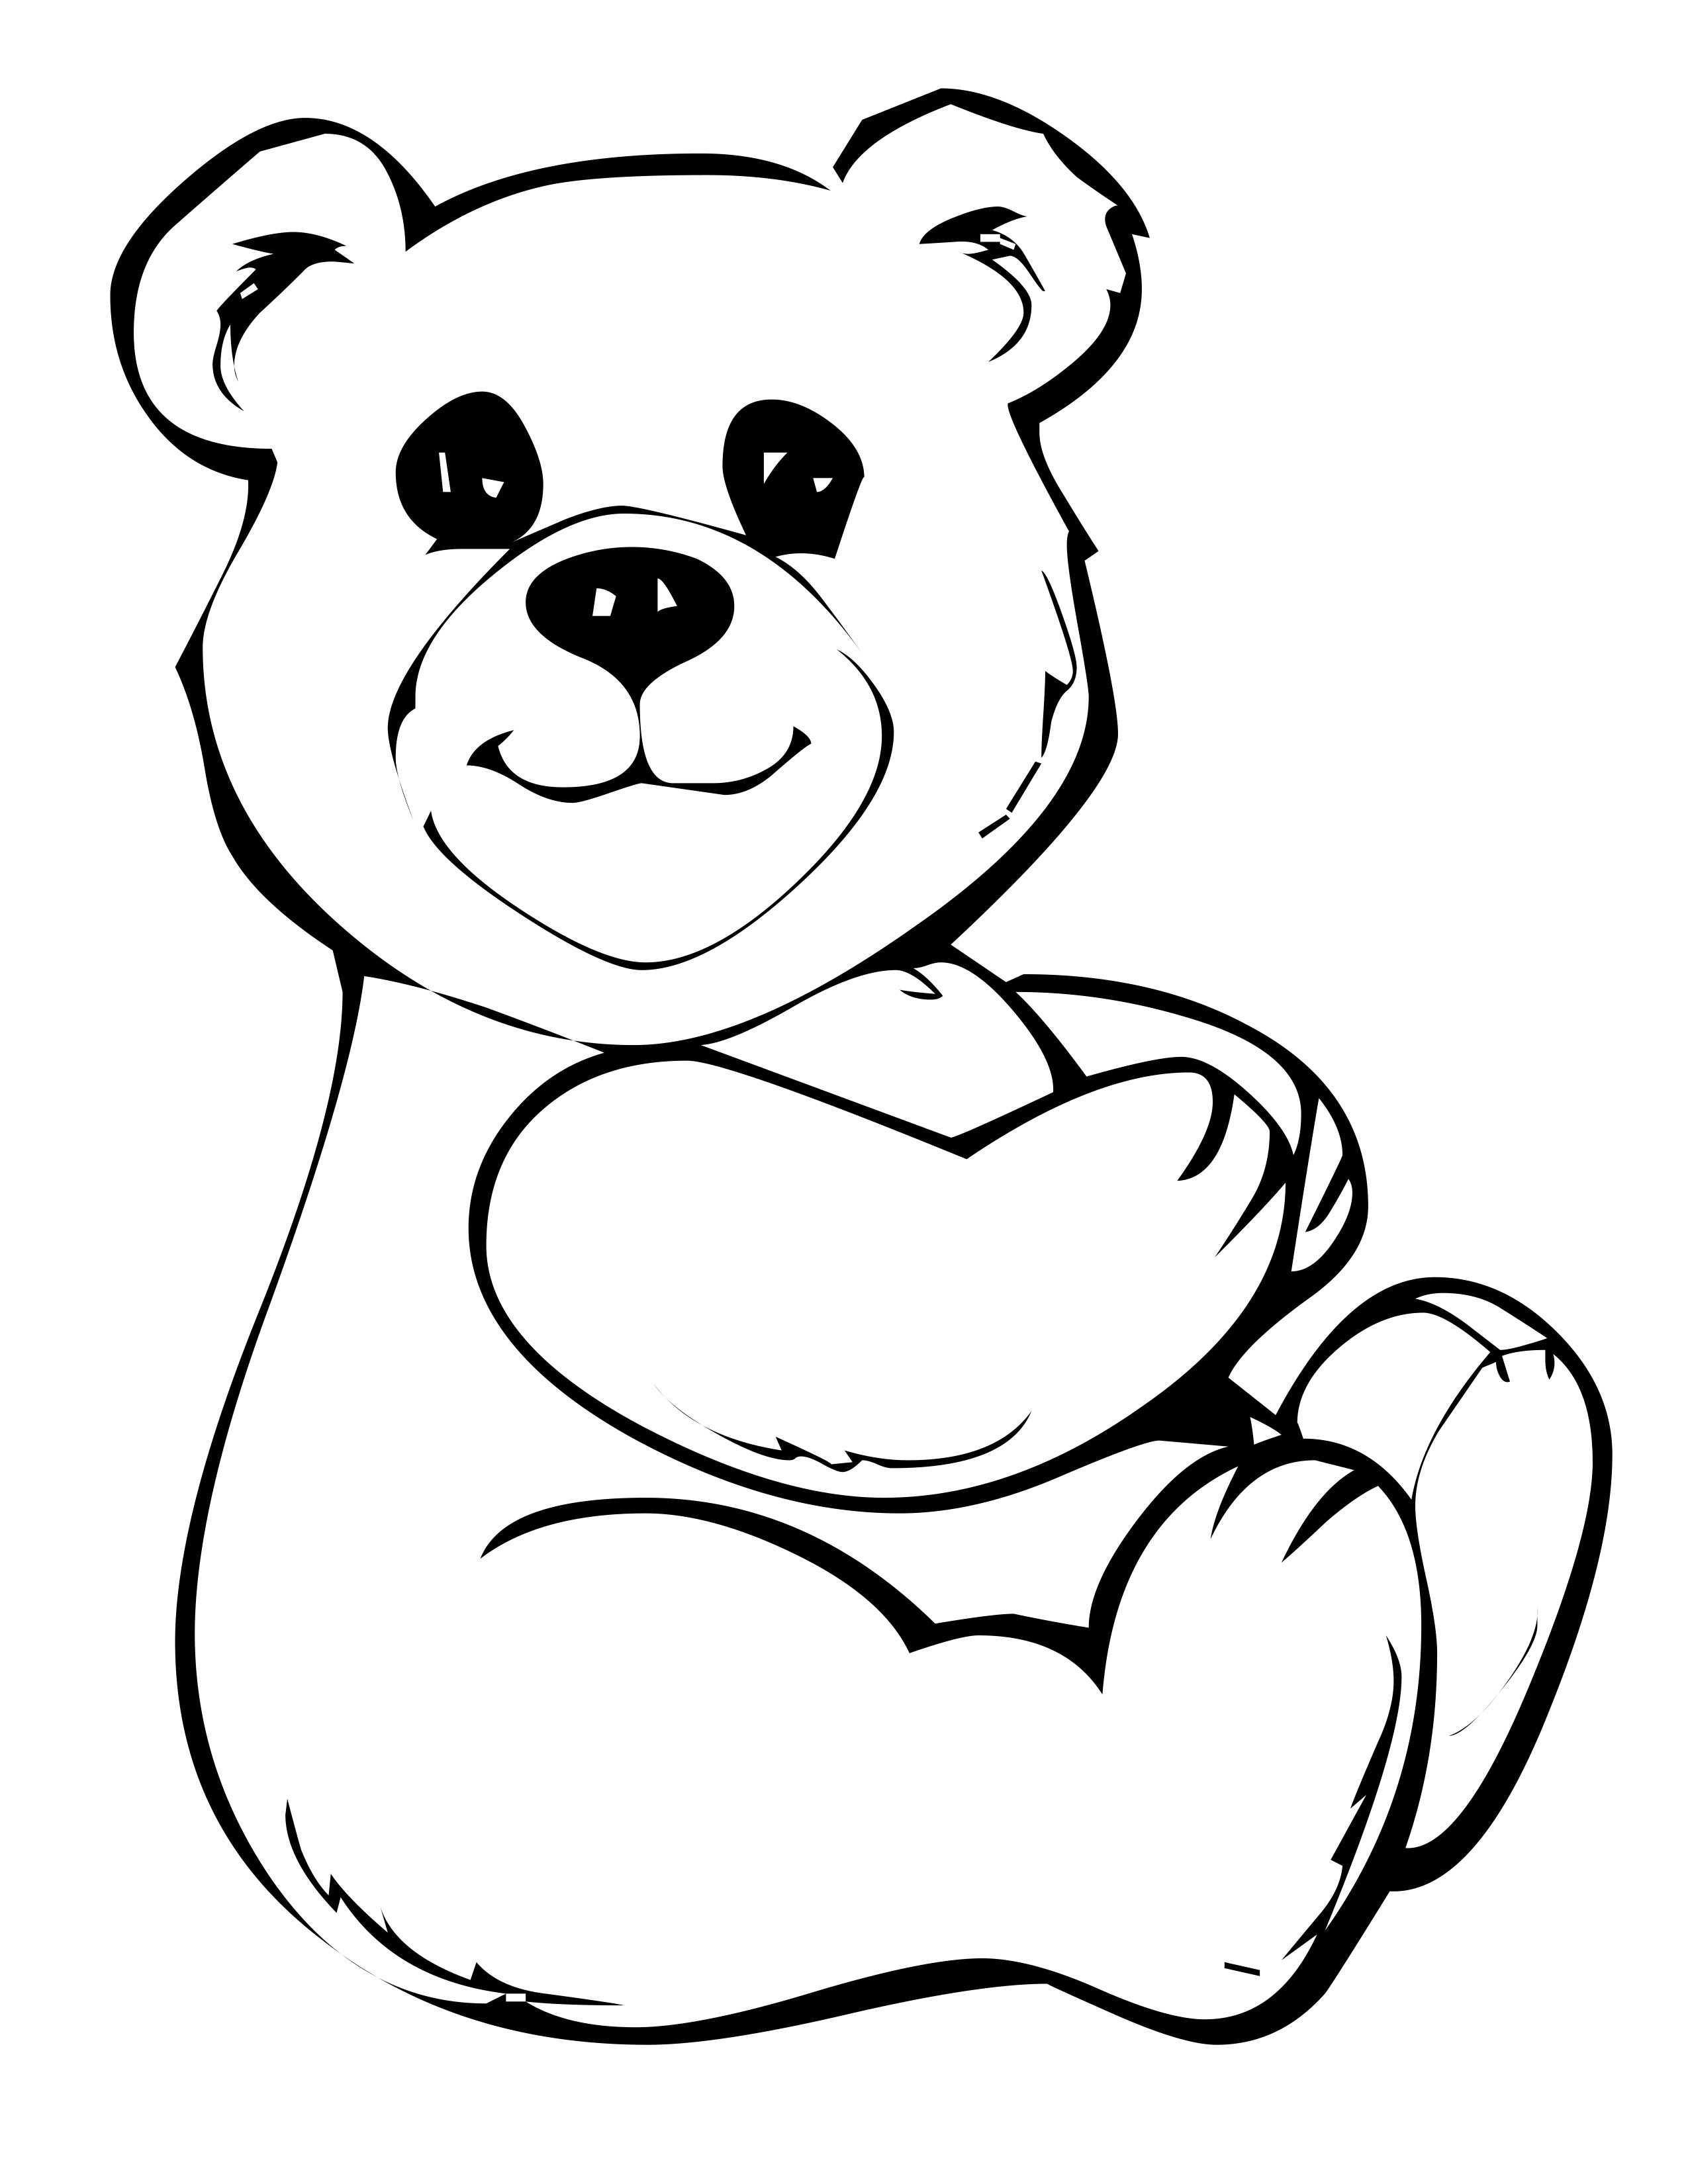 Bear Coloring Pages
 Free Printable Teddy Bear Coloring Pages For Kids